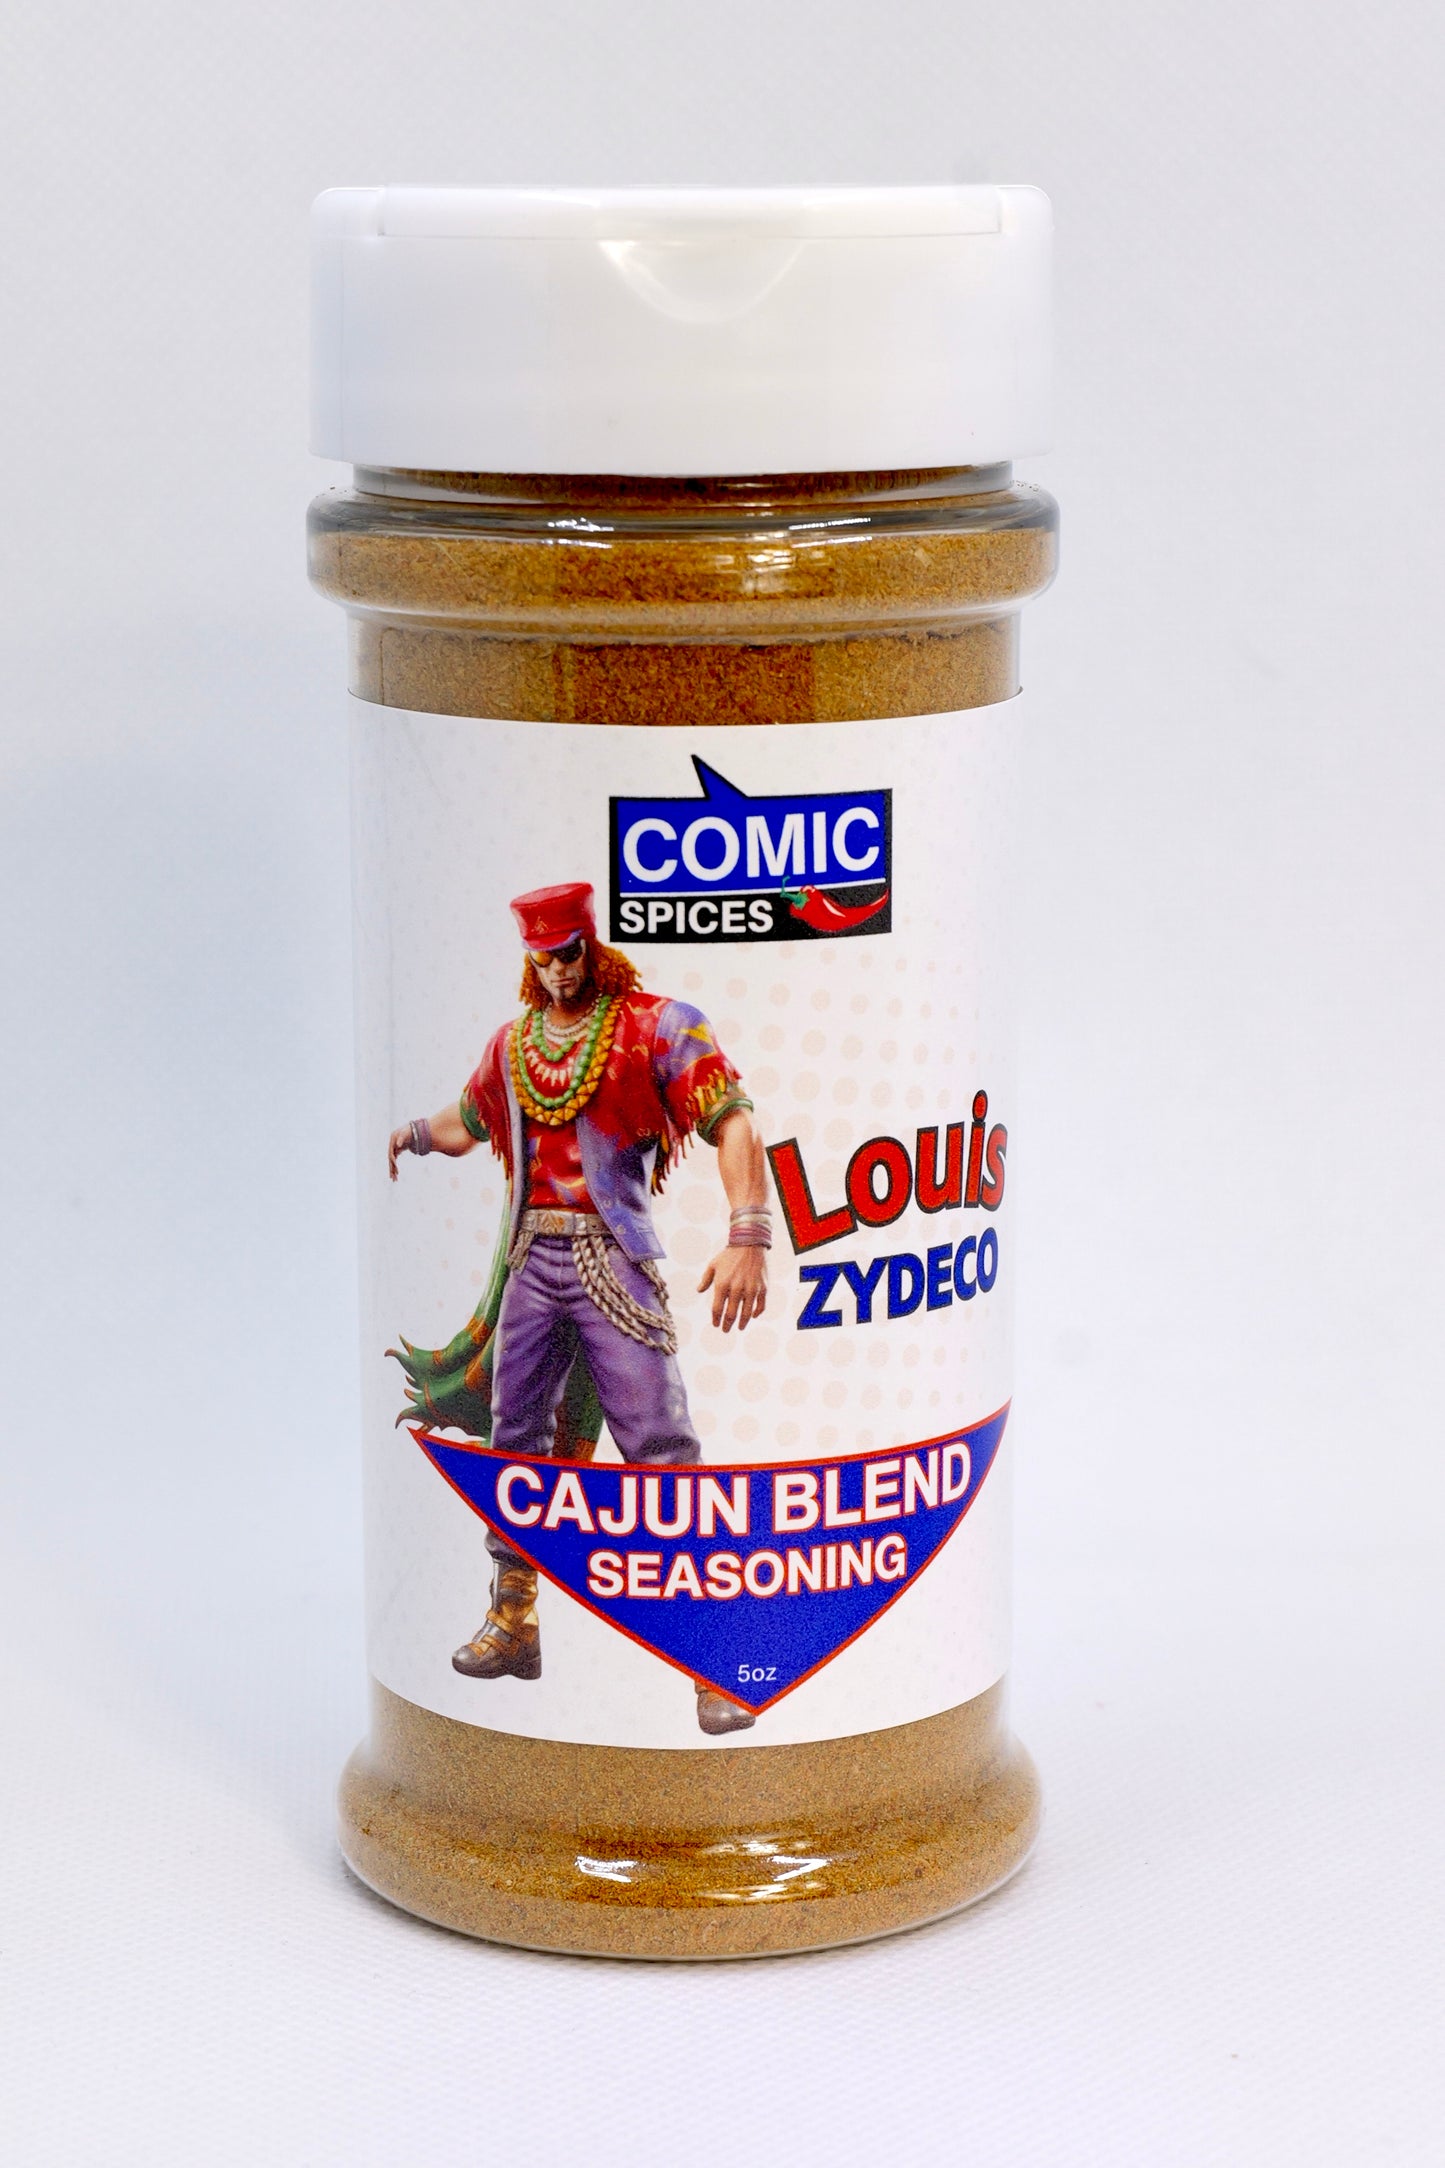 𝗖𝗮𝗷𝘂𝗻 𝗕𝗹𝗲𝗻𝗱 𝗦𝗲𝗮𝘀𝗼𝗻𝗶𝗻𝗴 - Authentic Cajun Spice Mix for Gumbo, Seafood, Burgers, Blackening